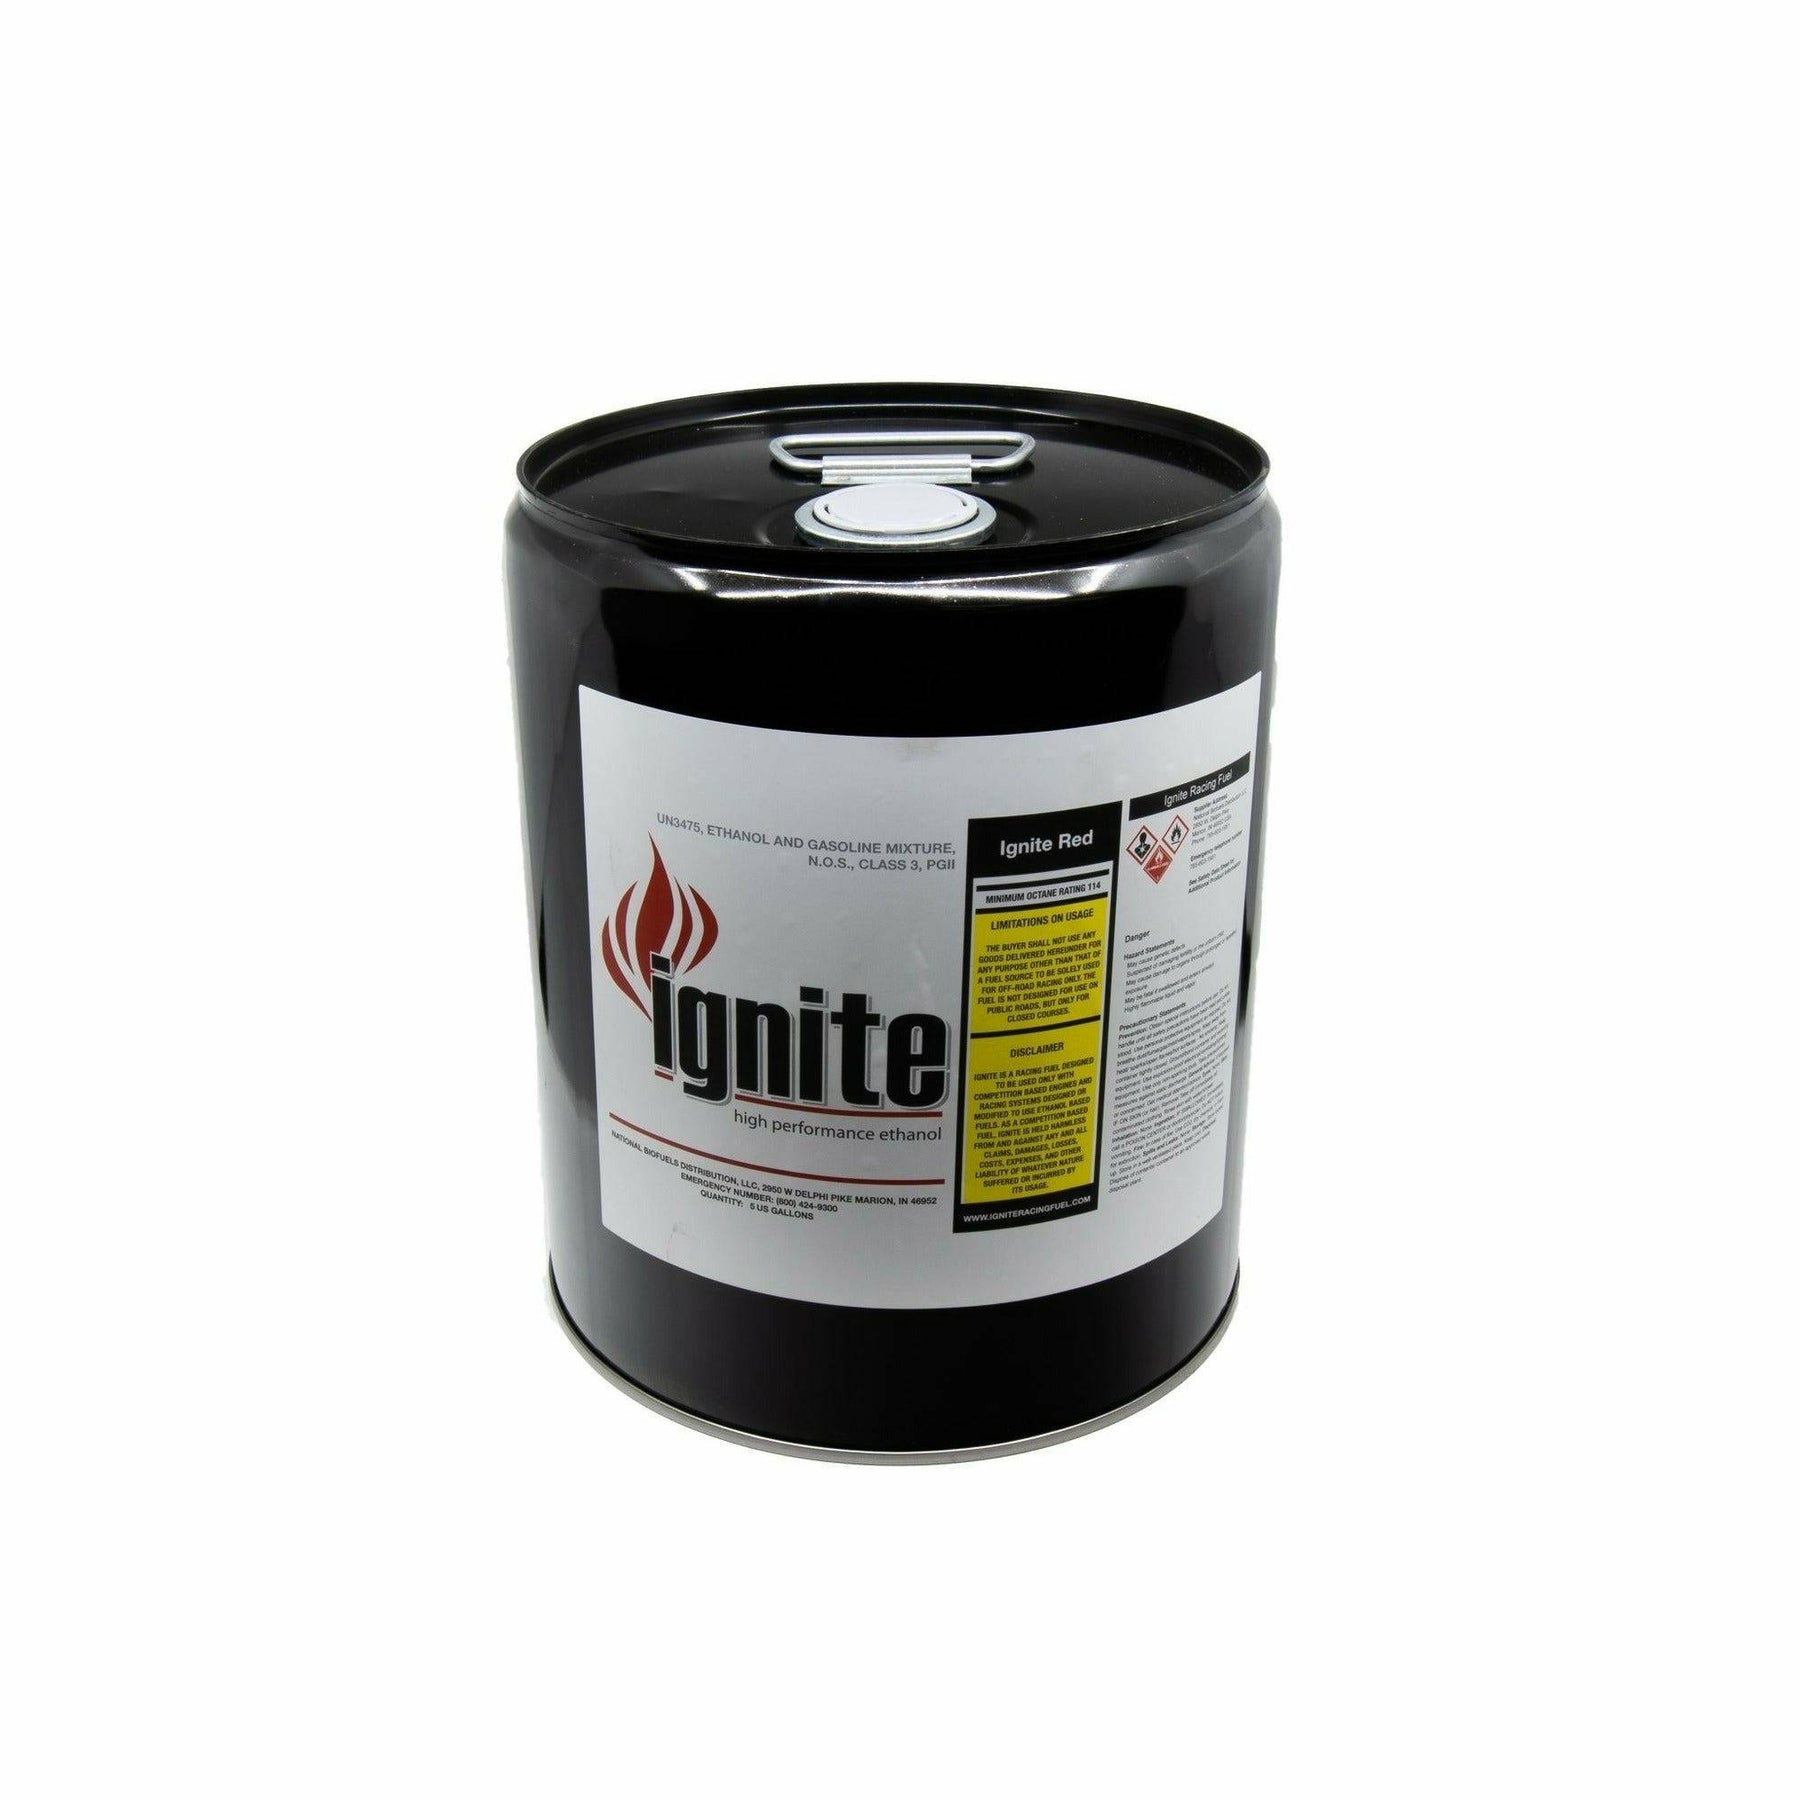 Ignite Red 114 (E90) High Performance Fuel